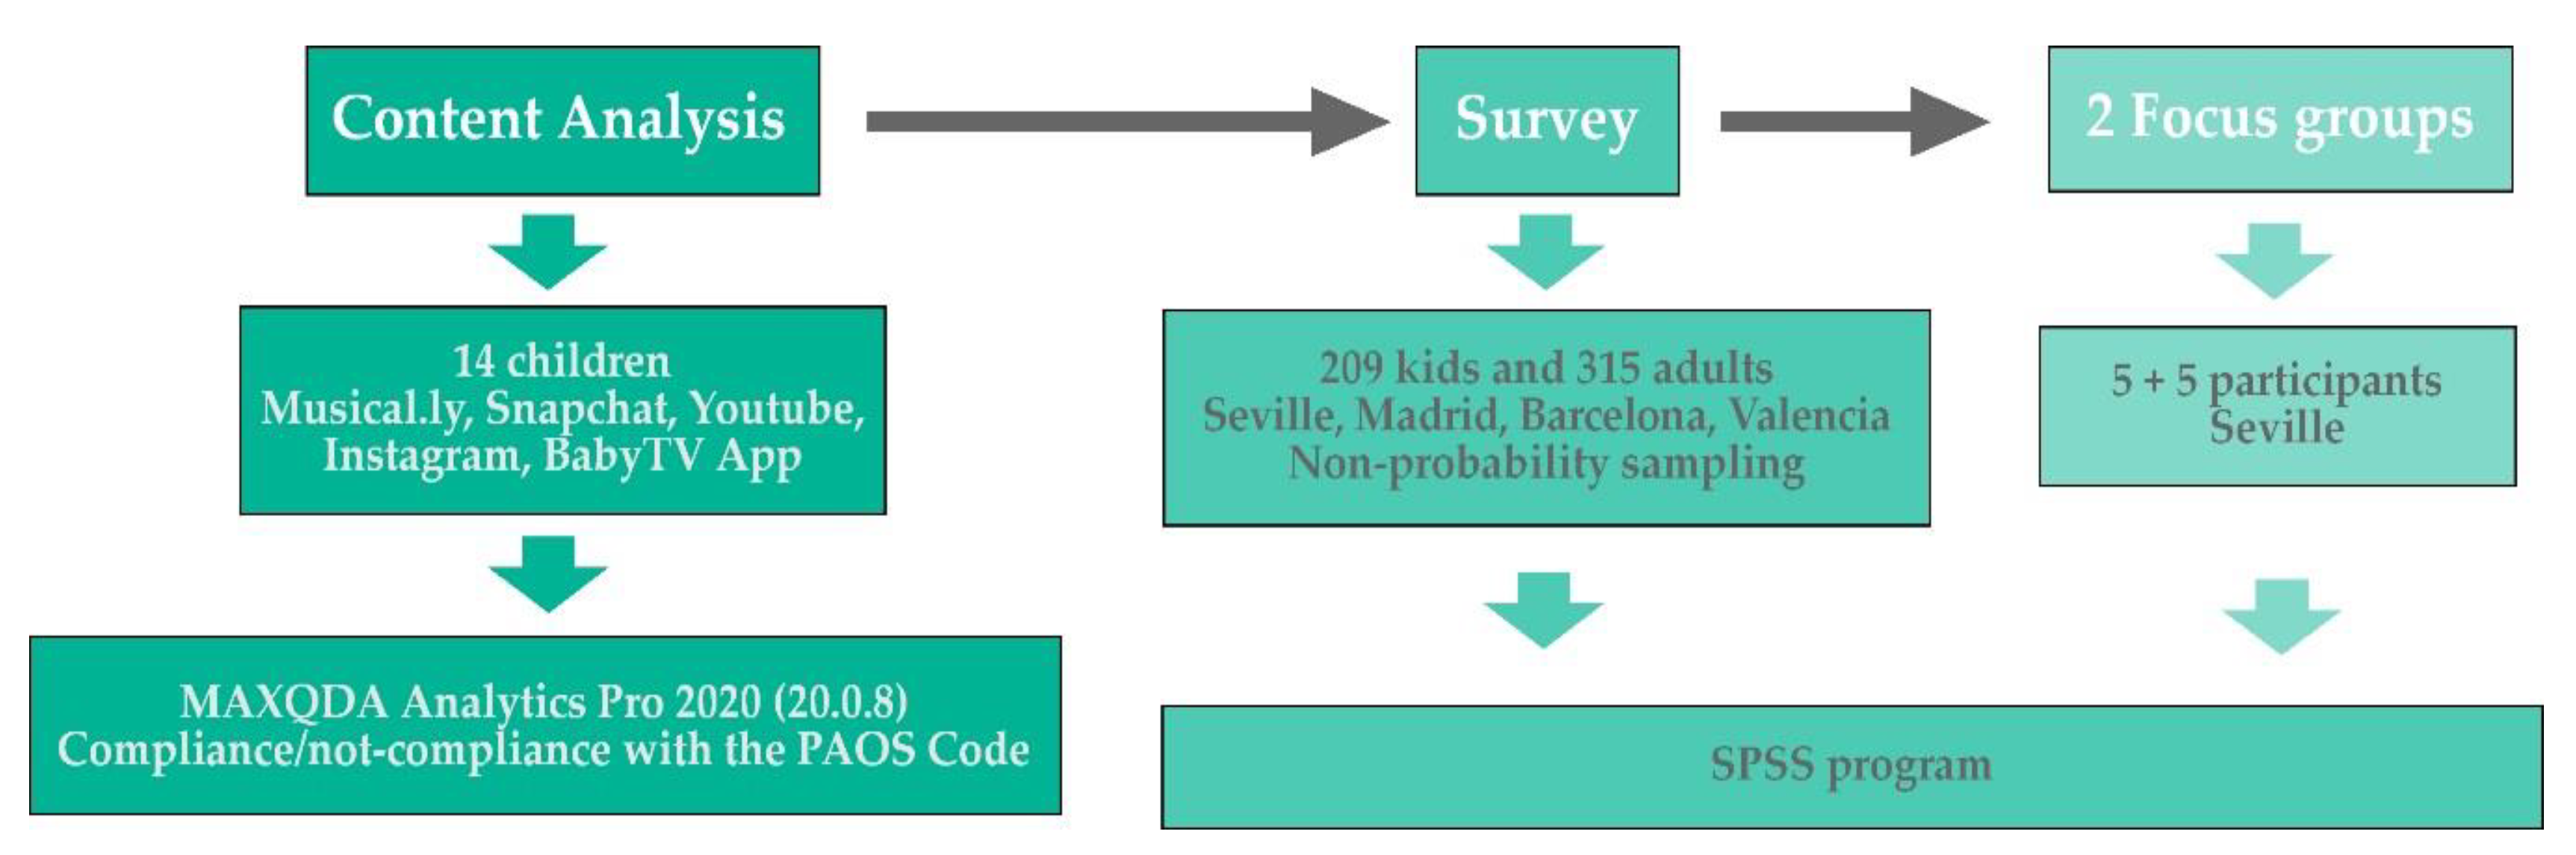 Ijerph Free Full Text Food And Beverage Advertising Aimed At Spanish Children Issued Through Mobile Devices A Study From A Social Marketing And Happiness Management Perspective Html